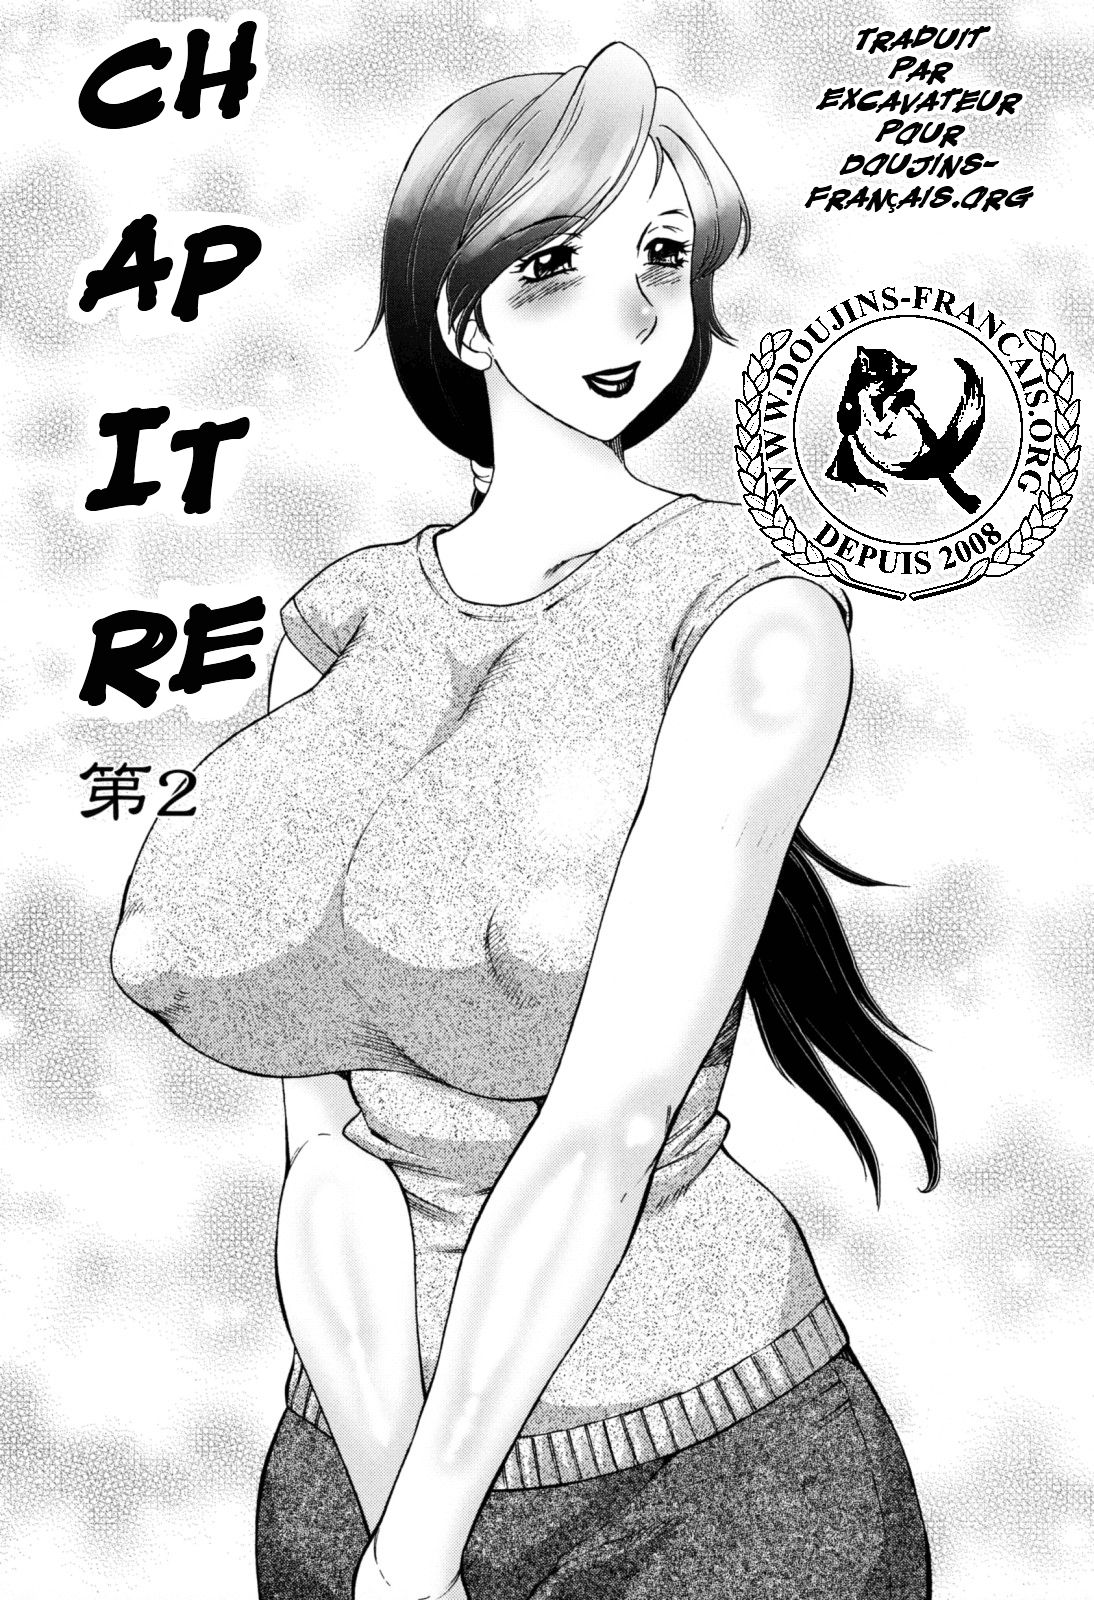 Boshino Toriko - The Captive of Mother and the Son Ch. 1-5 numero d'image 24